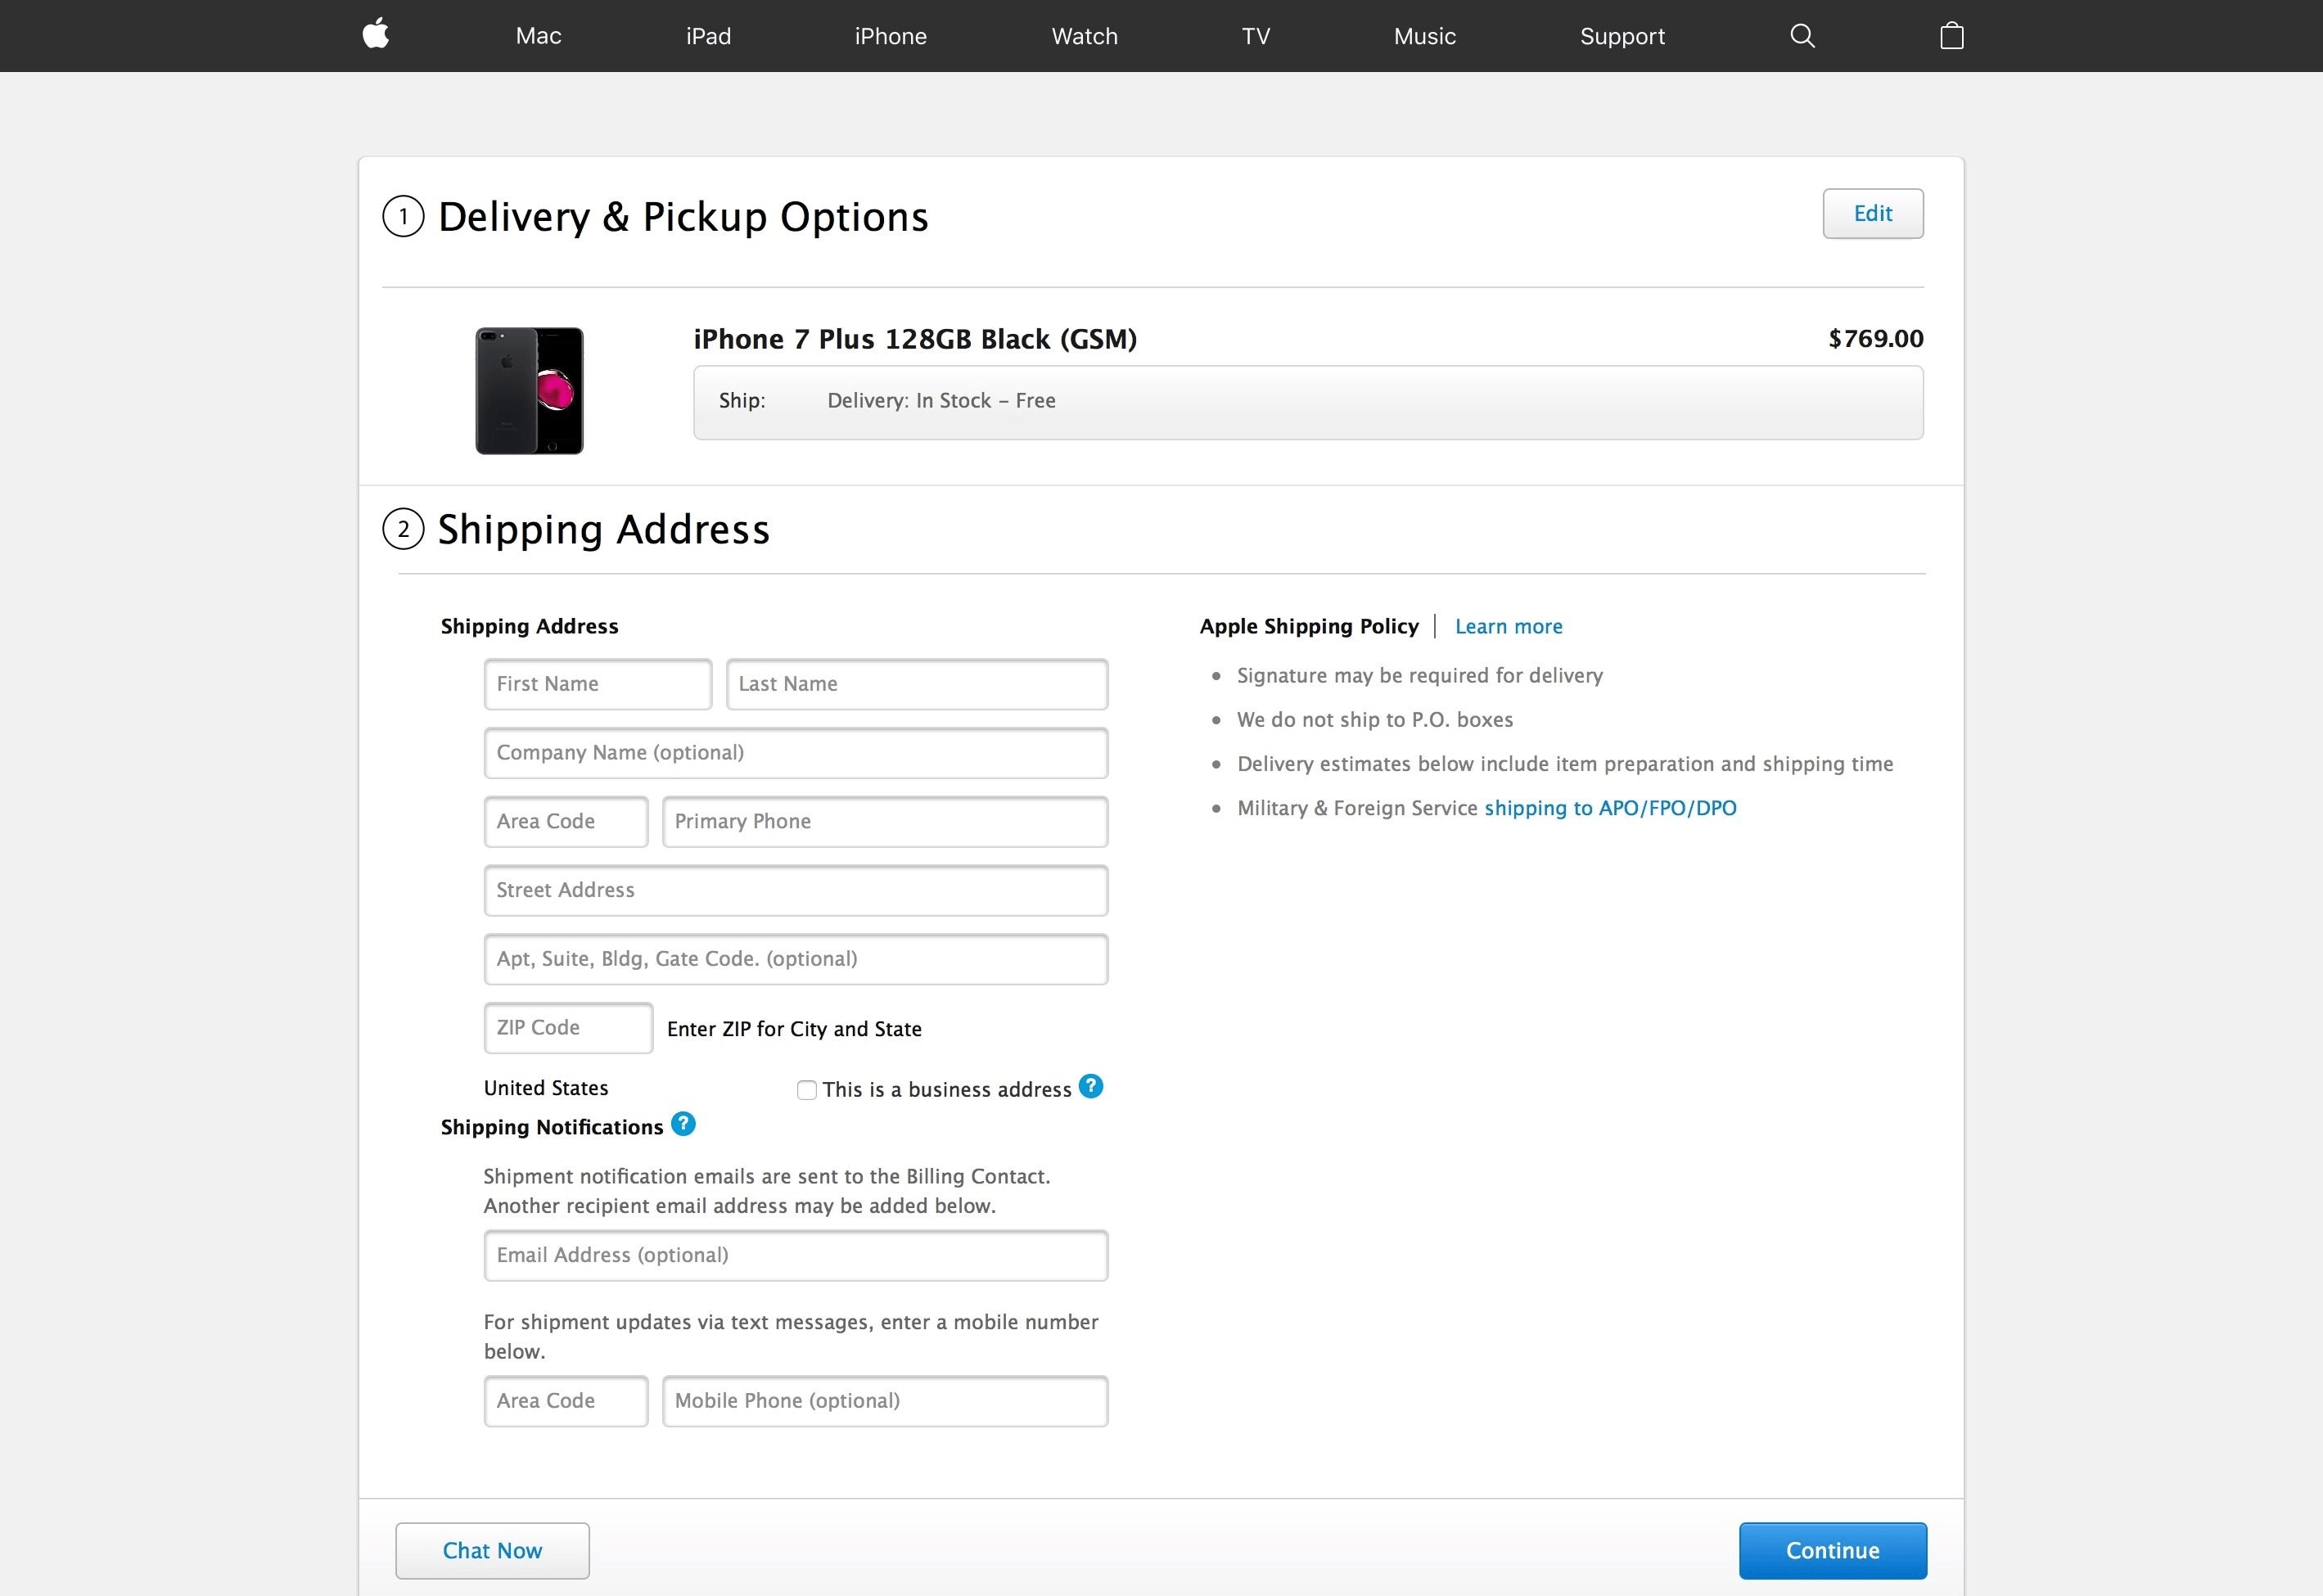 Tutorial on how to buy an Apple product on pre-order